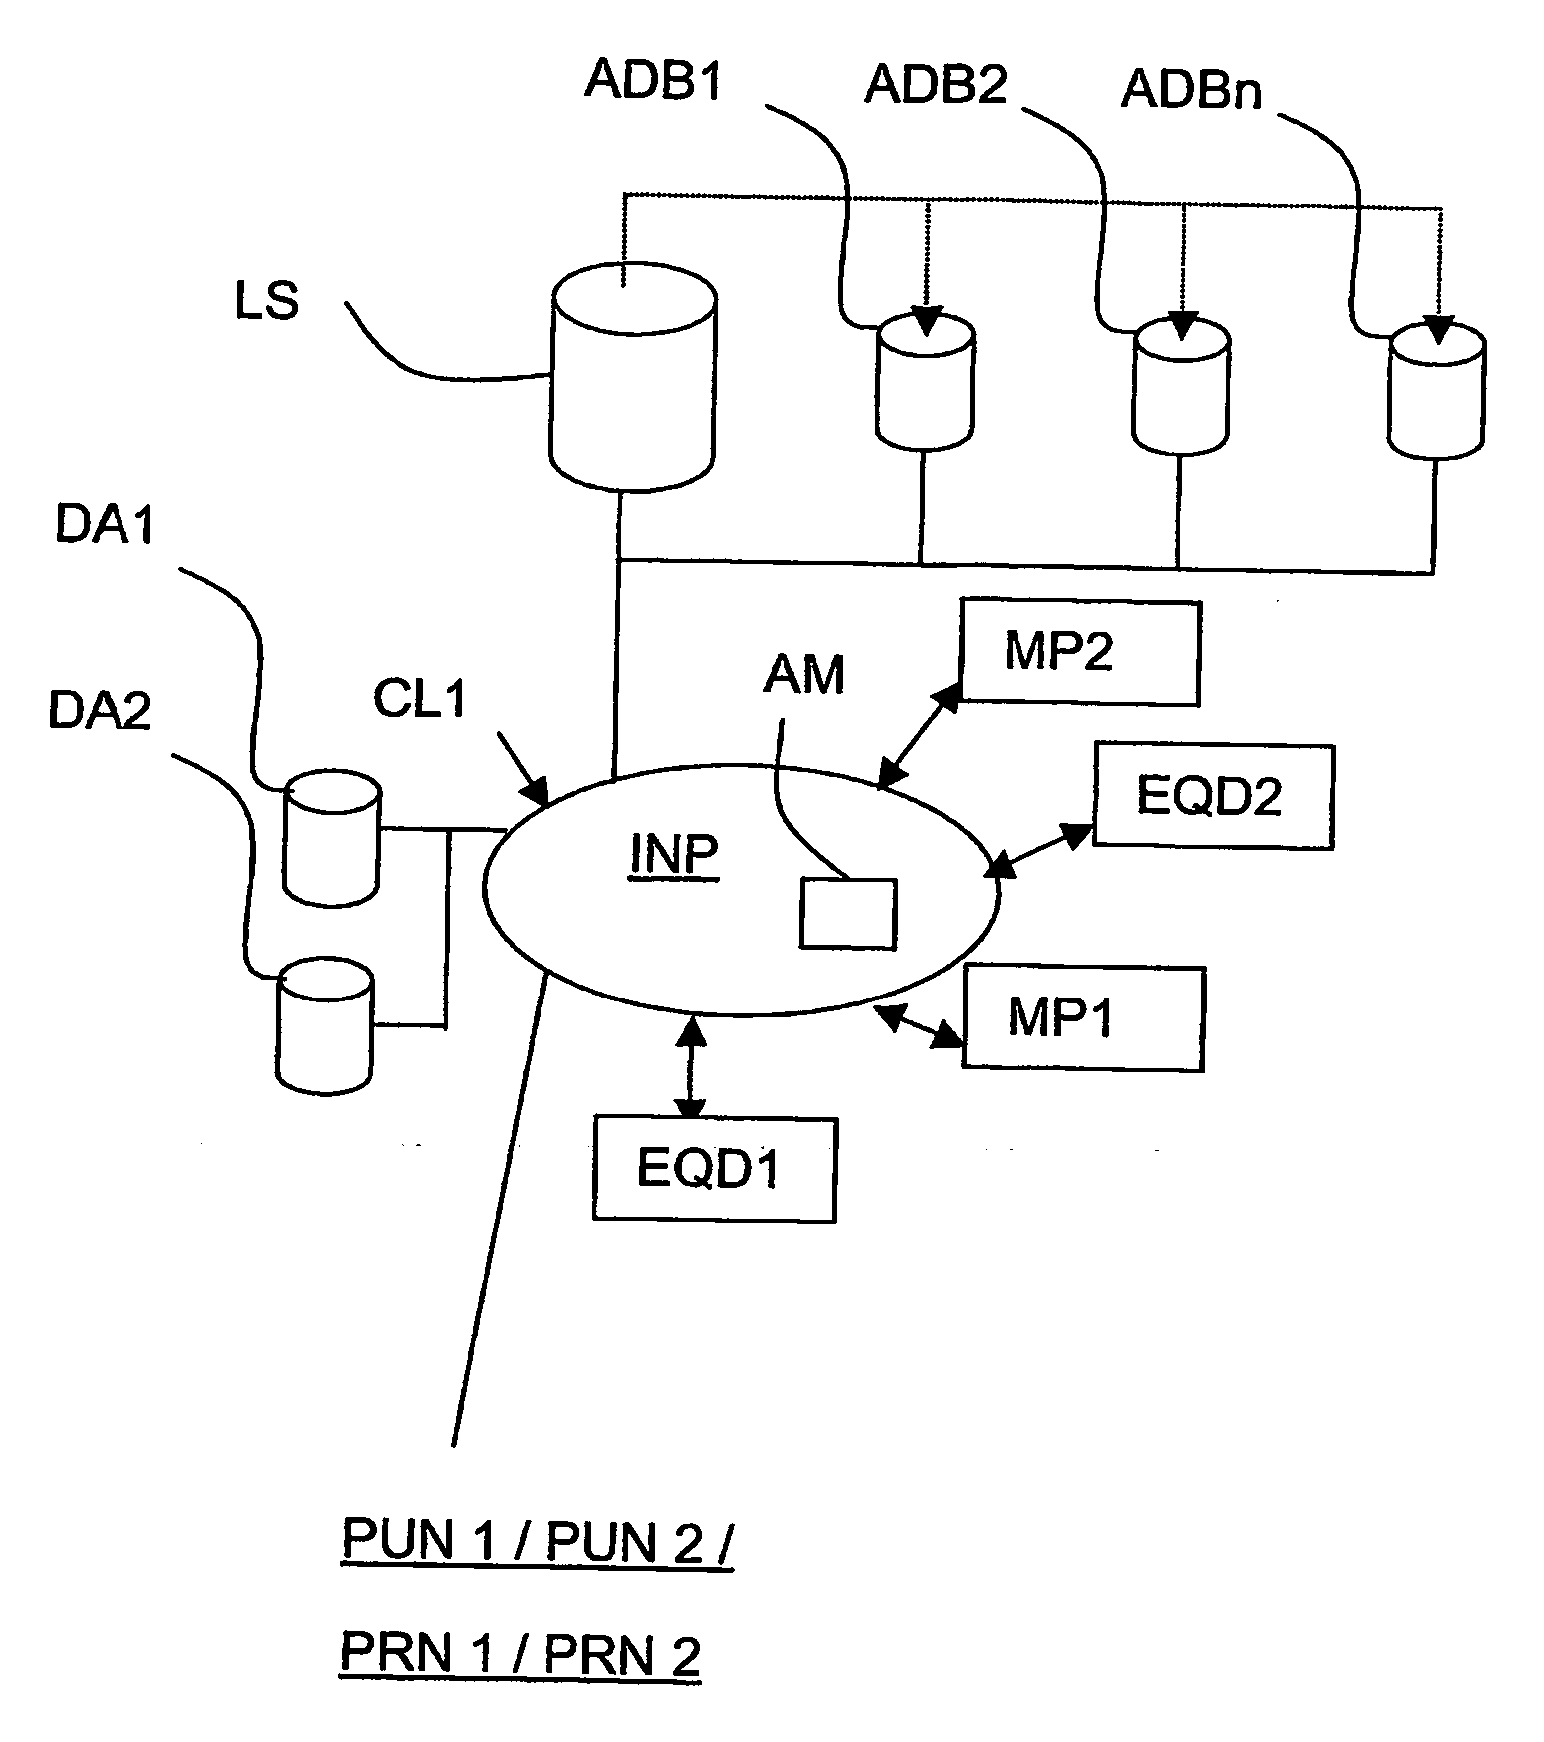 Process for presenting a user state using several pieces of communication equipment